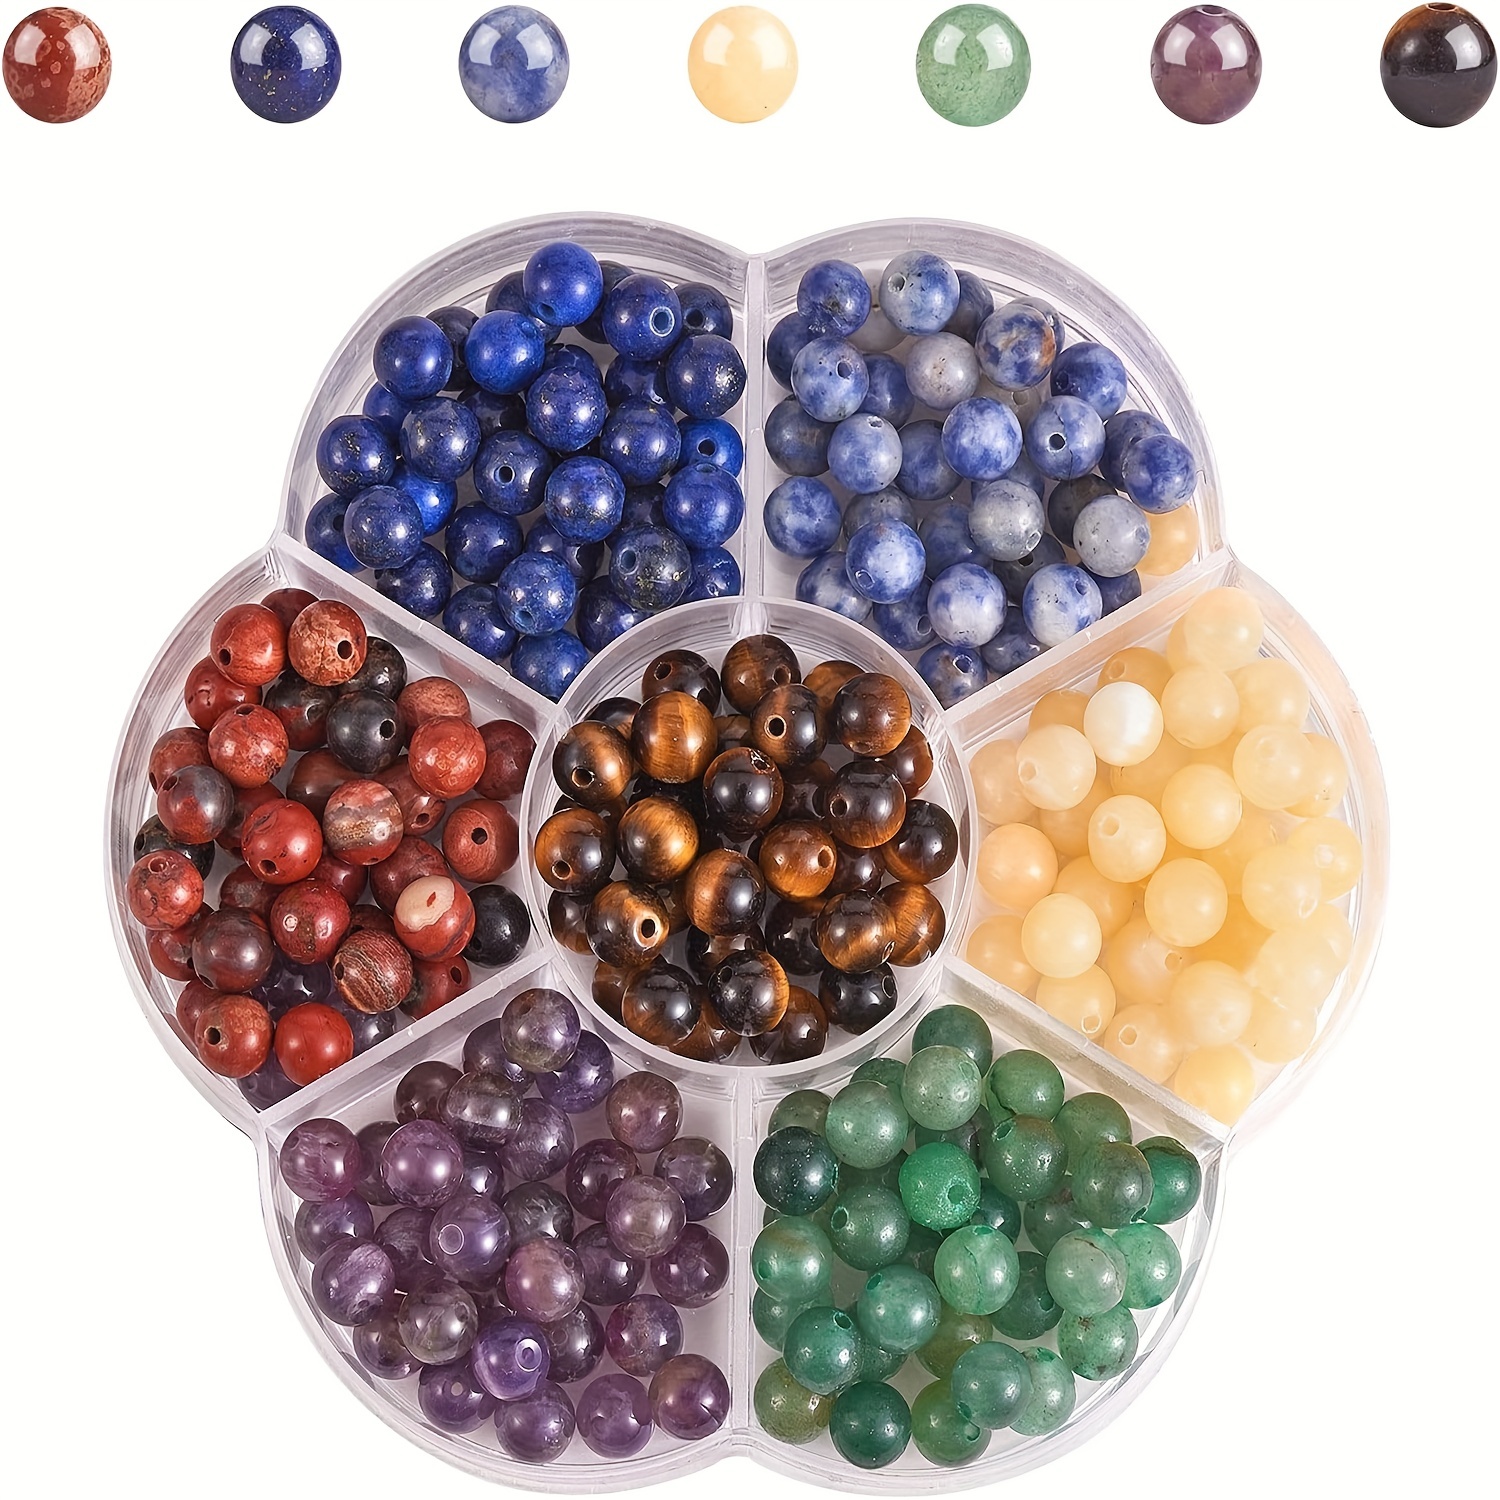 

6mm/8mm/10mm 7 Chakra Natural Stone Smooth Round Gemstone Beads Kit Mix Crystal Energy Healing Bulk Beads Charm For Diy Bracelet Necklace Earrings Jewelry Making Craft Supplies